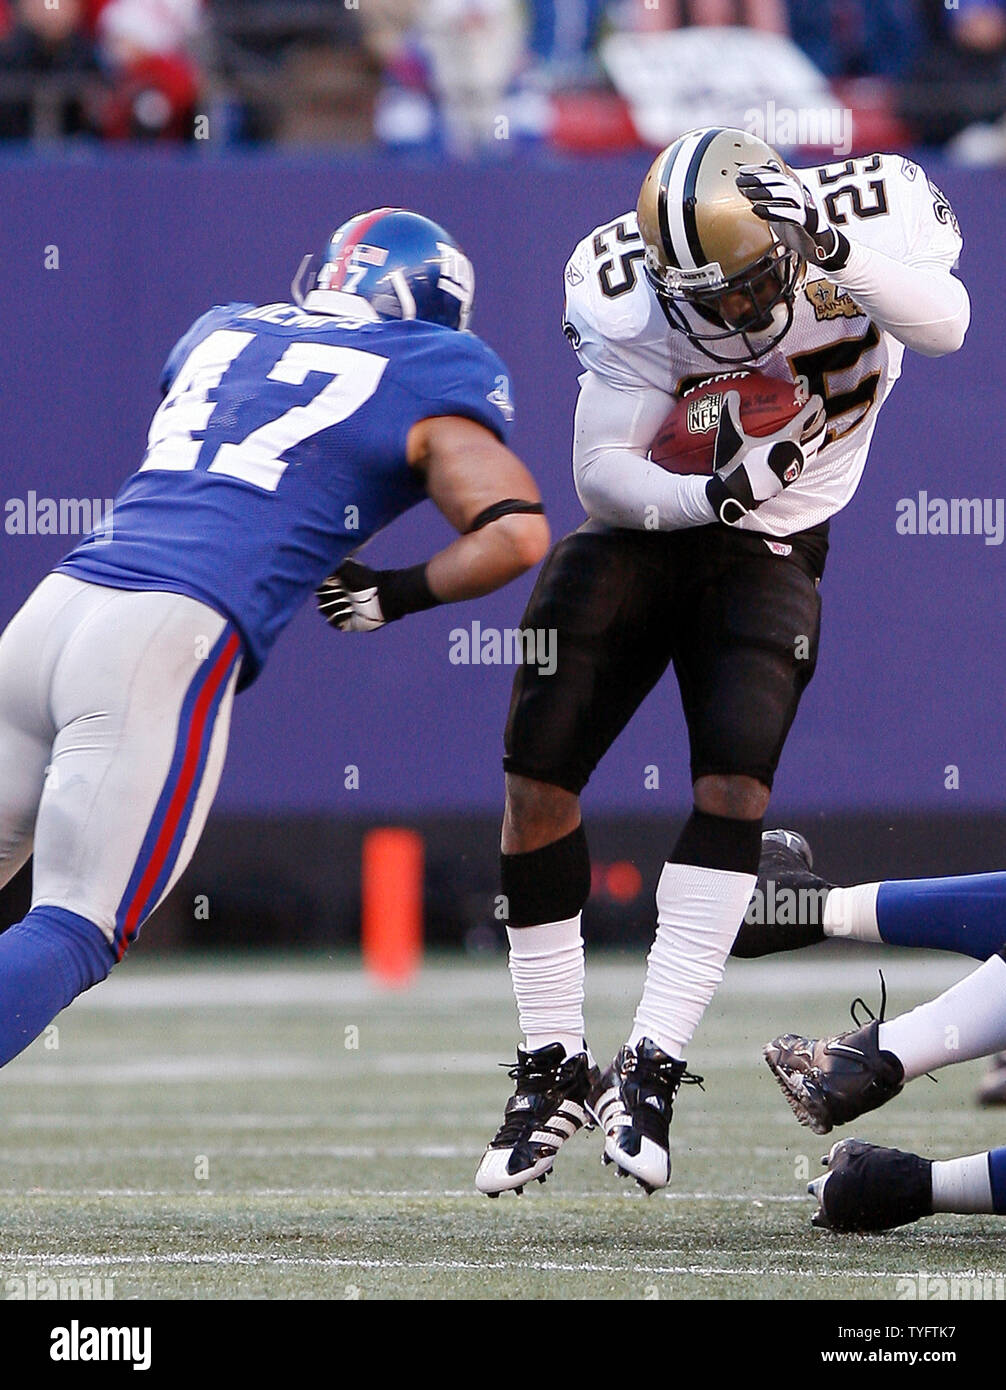 New Orleans Saints Reggie Bush gets hit hard by New York Giants Will Demps  in the 2nd quarter at Giants Stadium in East Rutherford, New Jersey on  December 24, 2006. The New